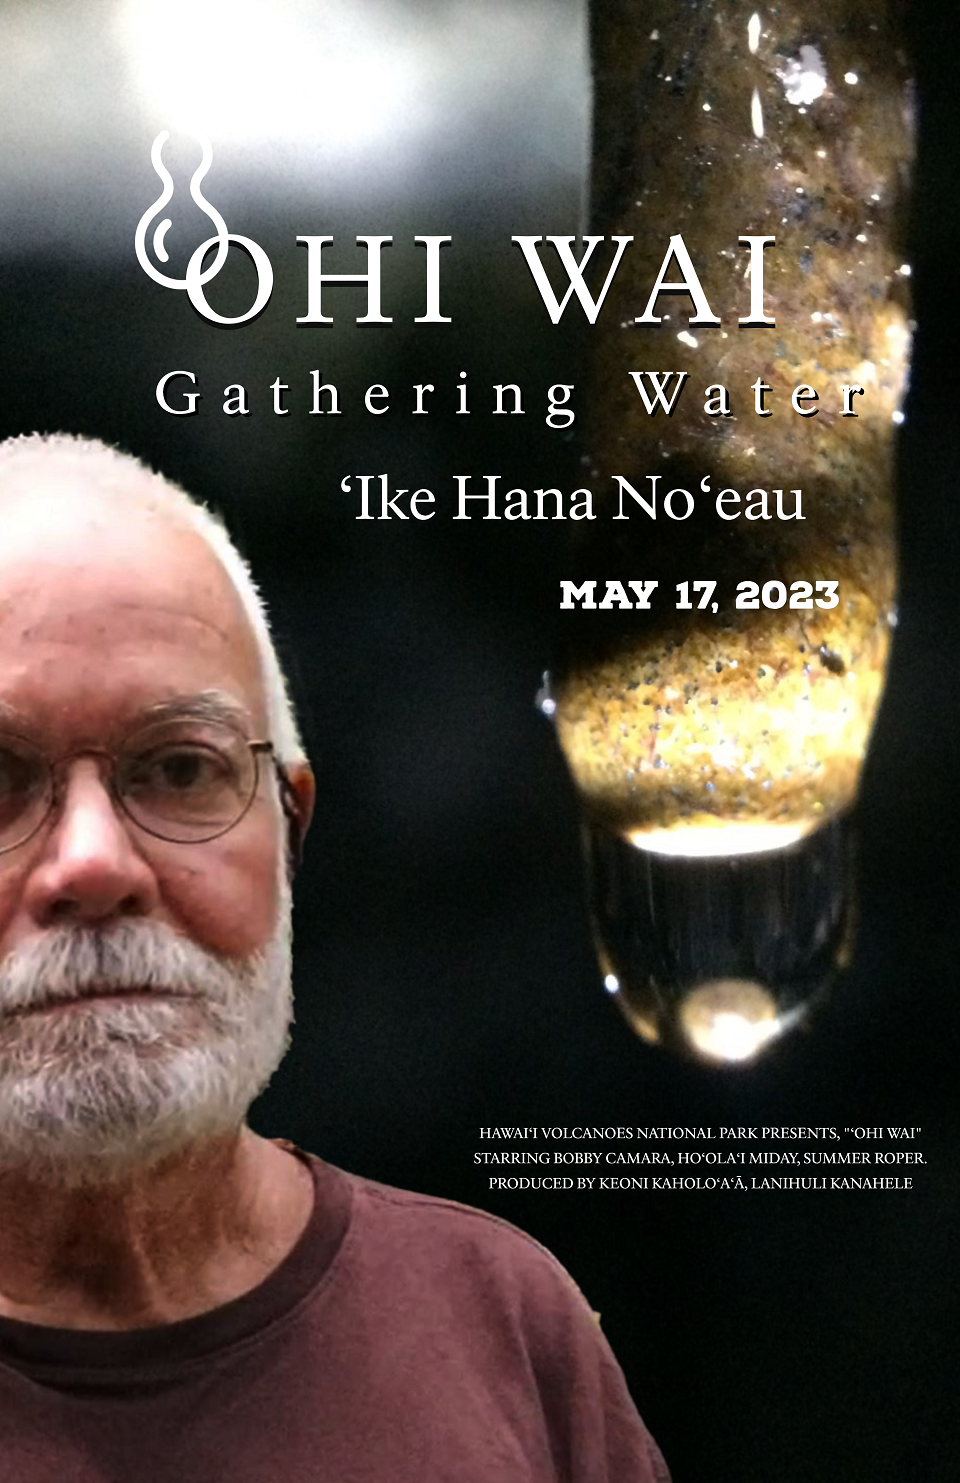 Movie poster showing a man's face, a drip of water and movie title text : 'Ohi Wai plus movie credits in small text